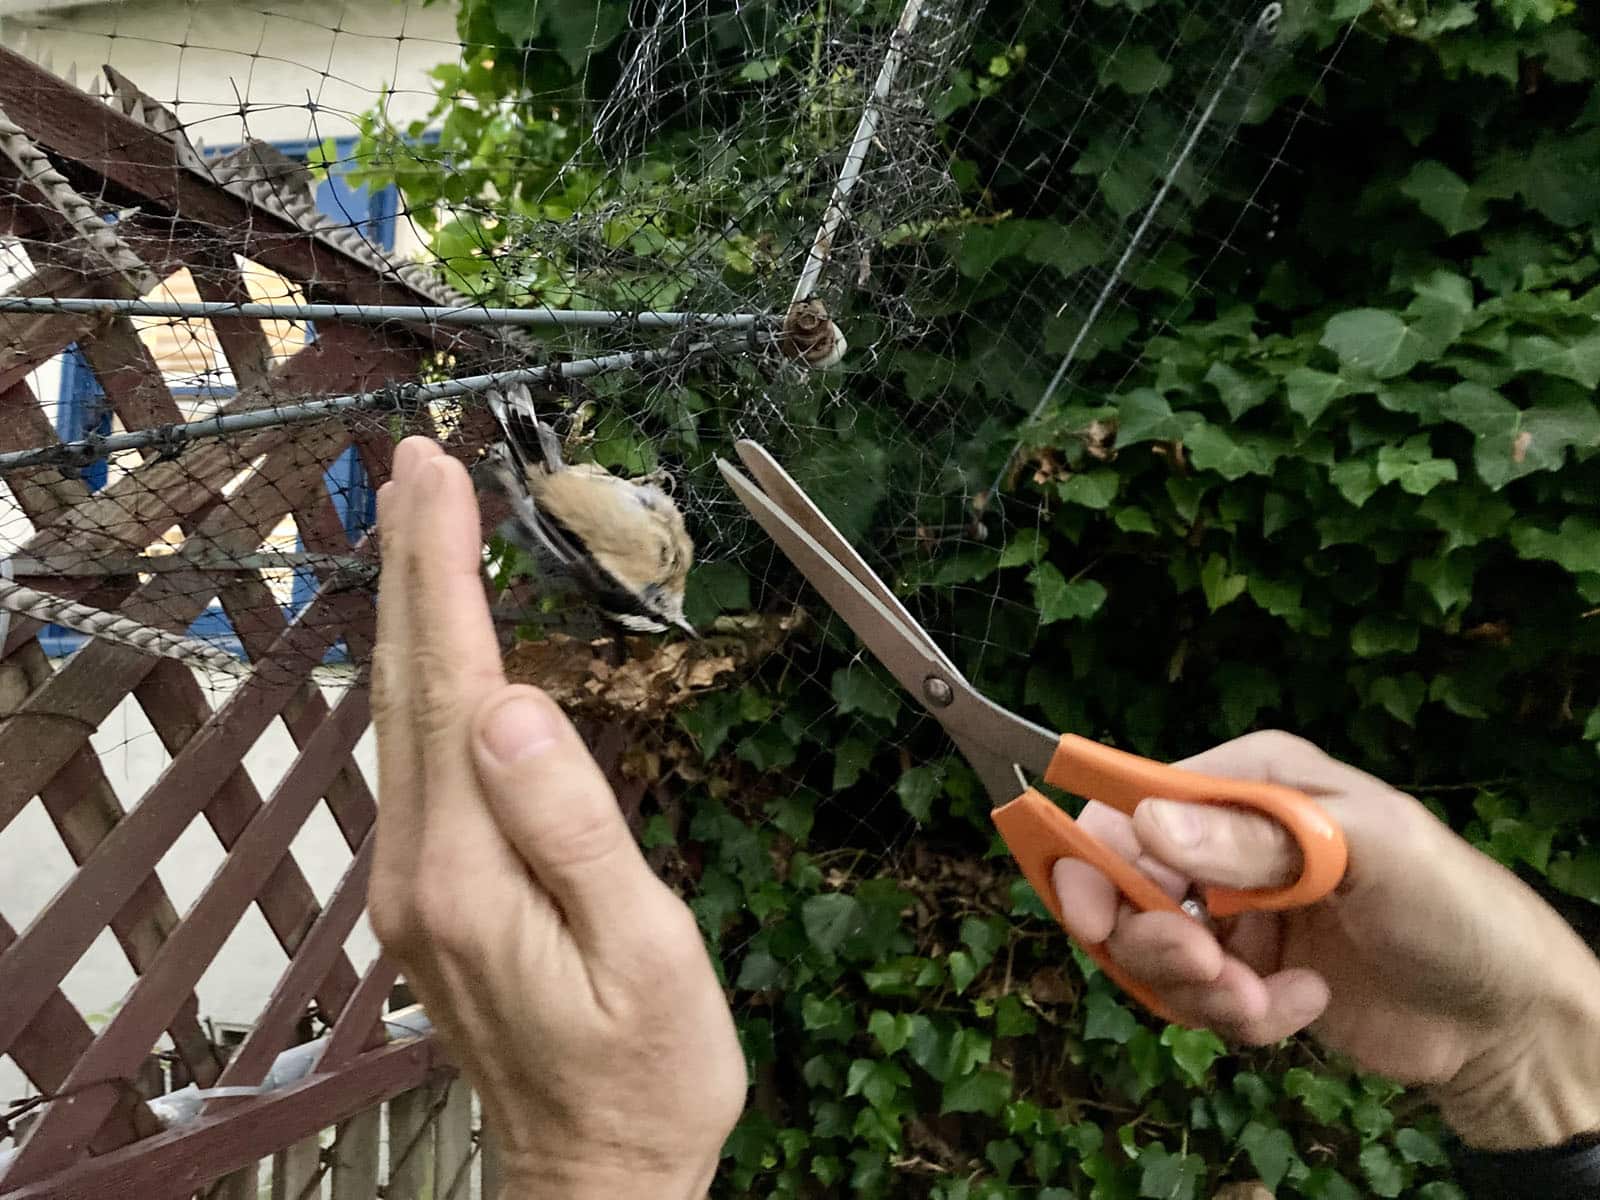 Alameda Post - a bird trapped in netting, a pair of hands, and a pair of scissors gently cutting the net in this animal rescue operation